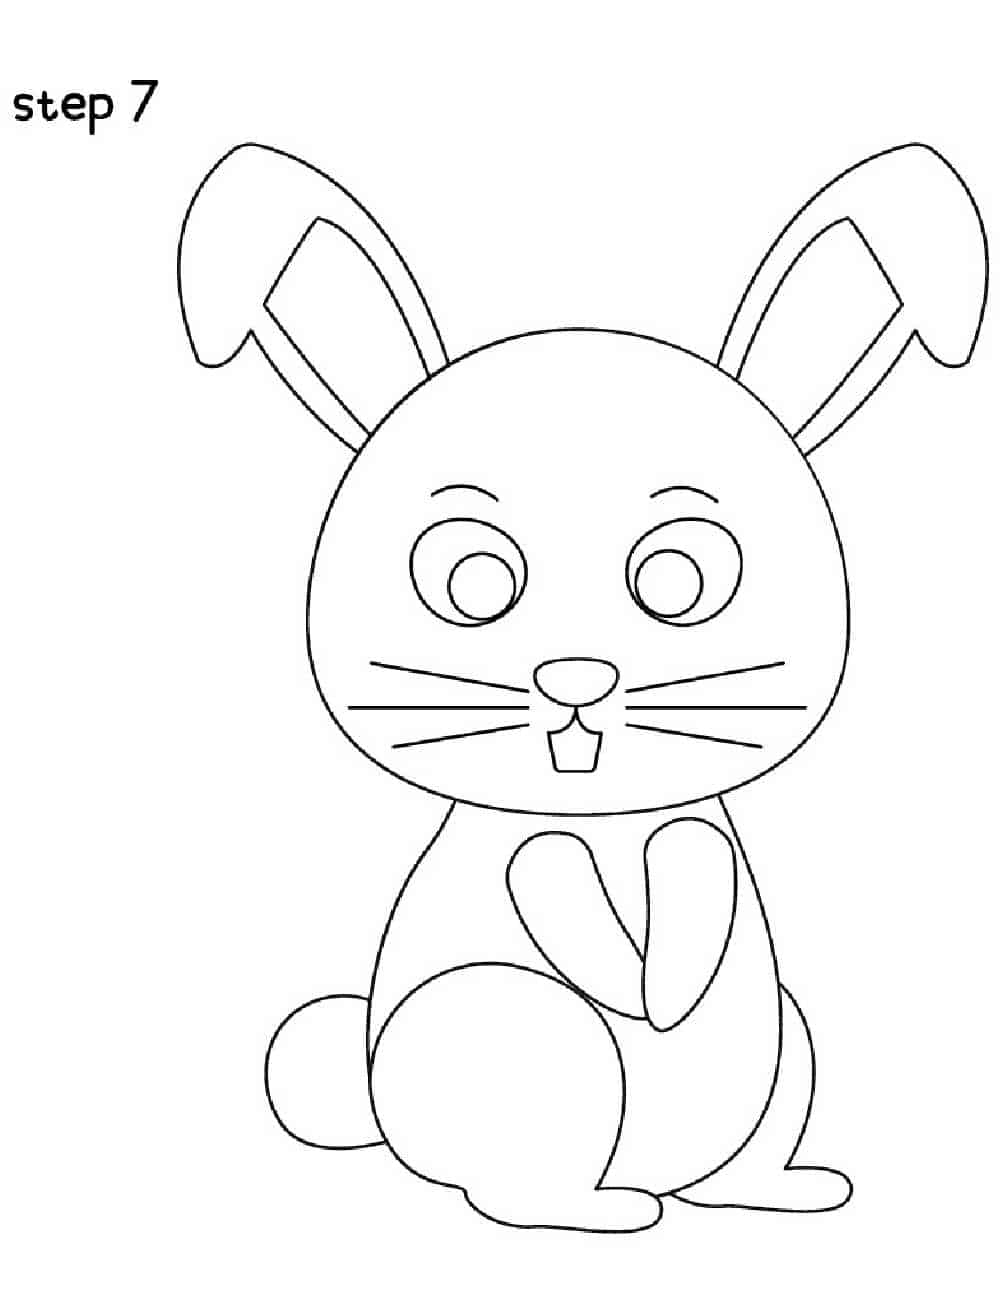 how to draw a bunny step 7